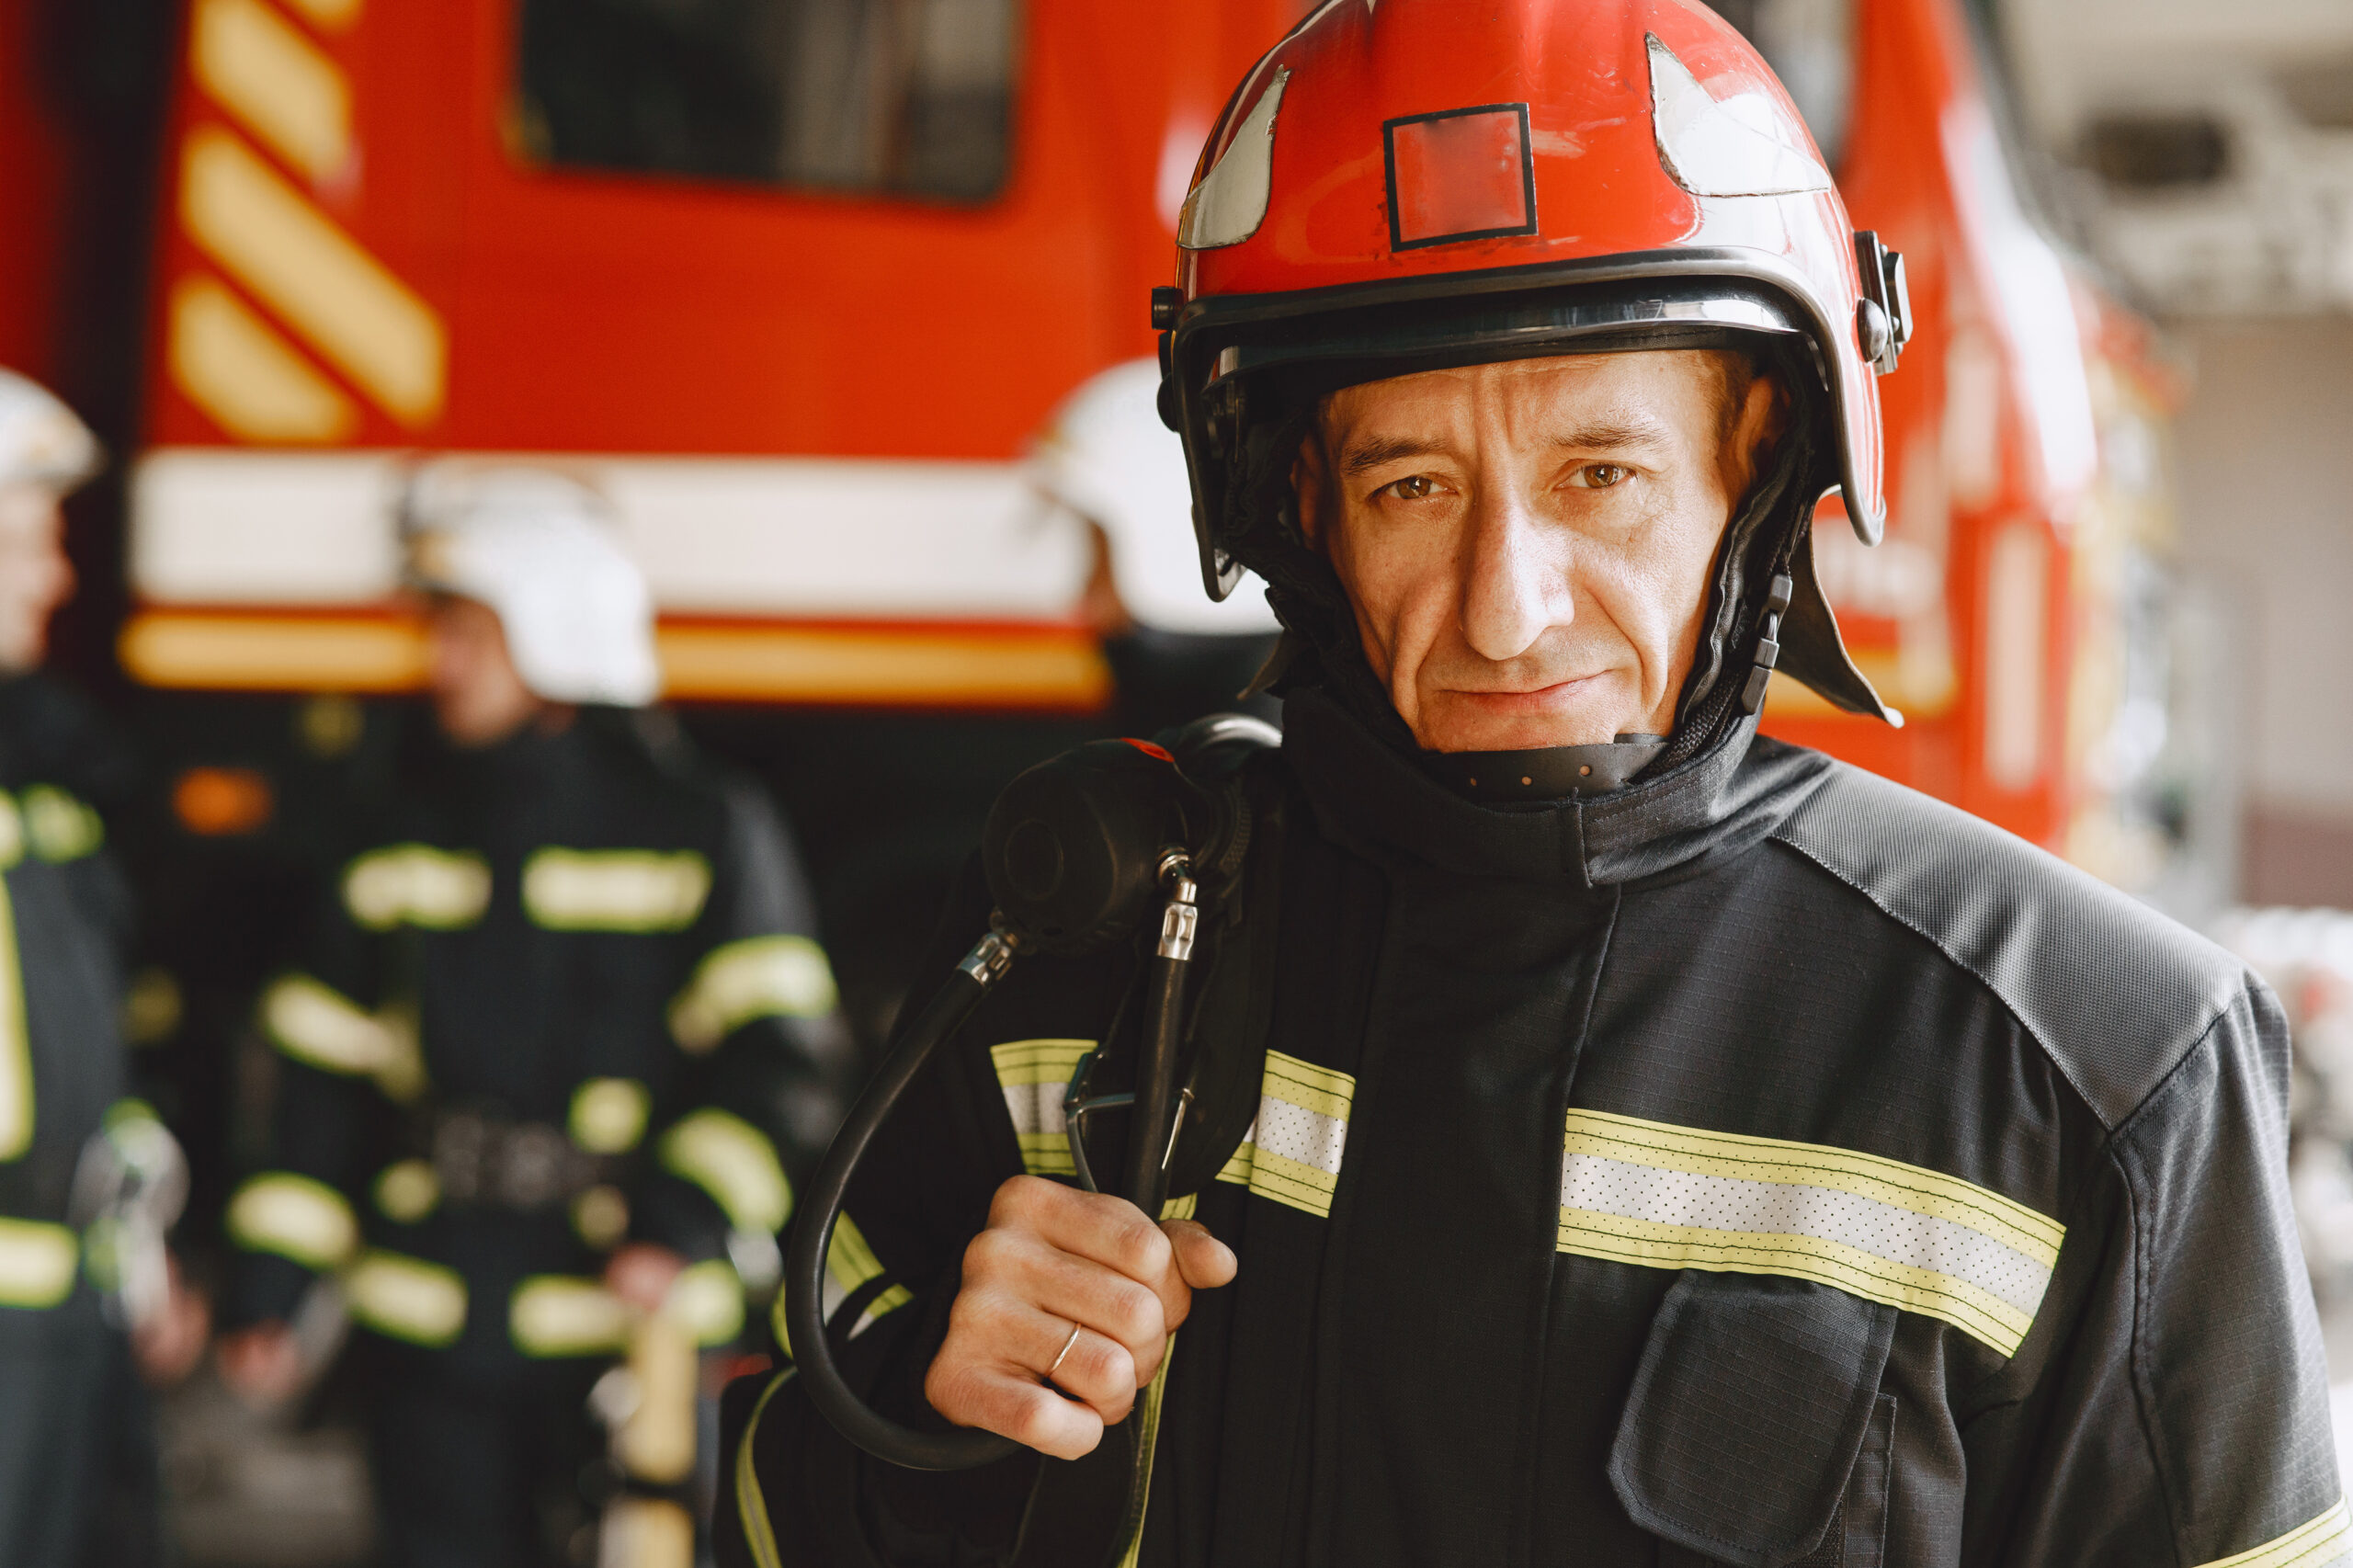 Firefighter stands at a meeting of a fire truck